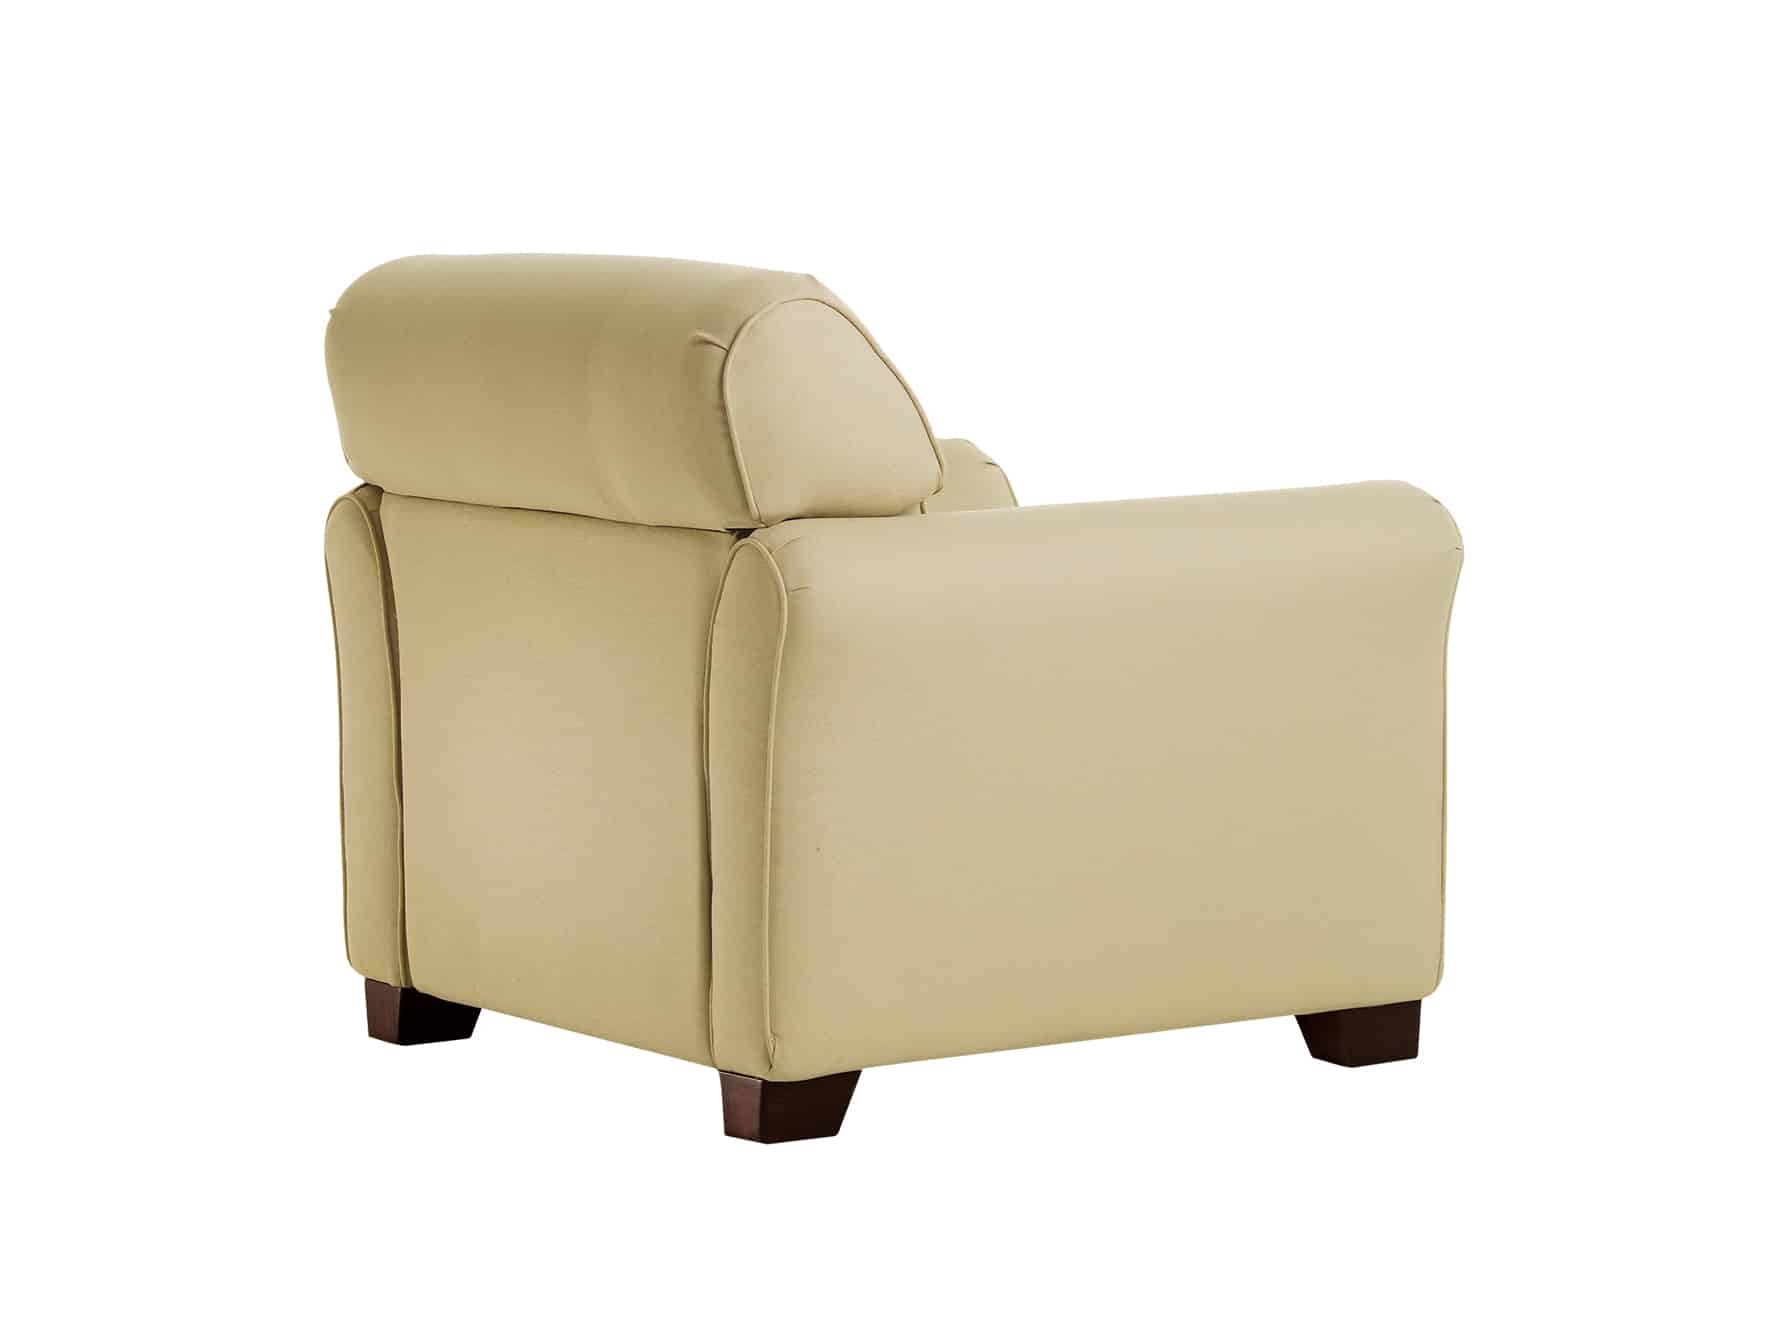 Comfortable Campus Furniture Moment Chair